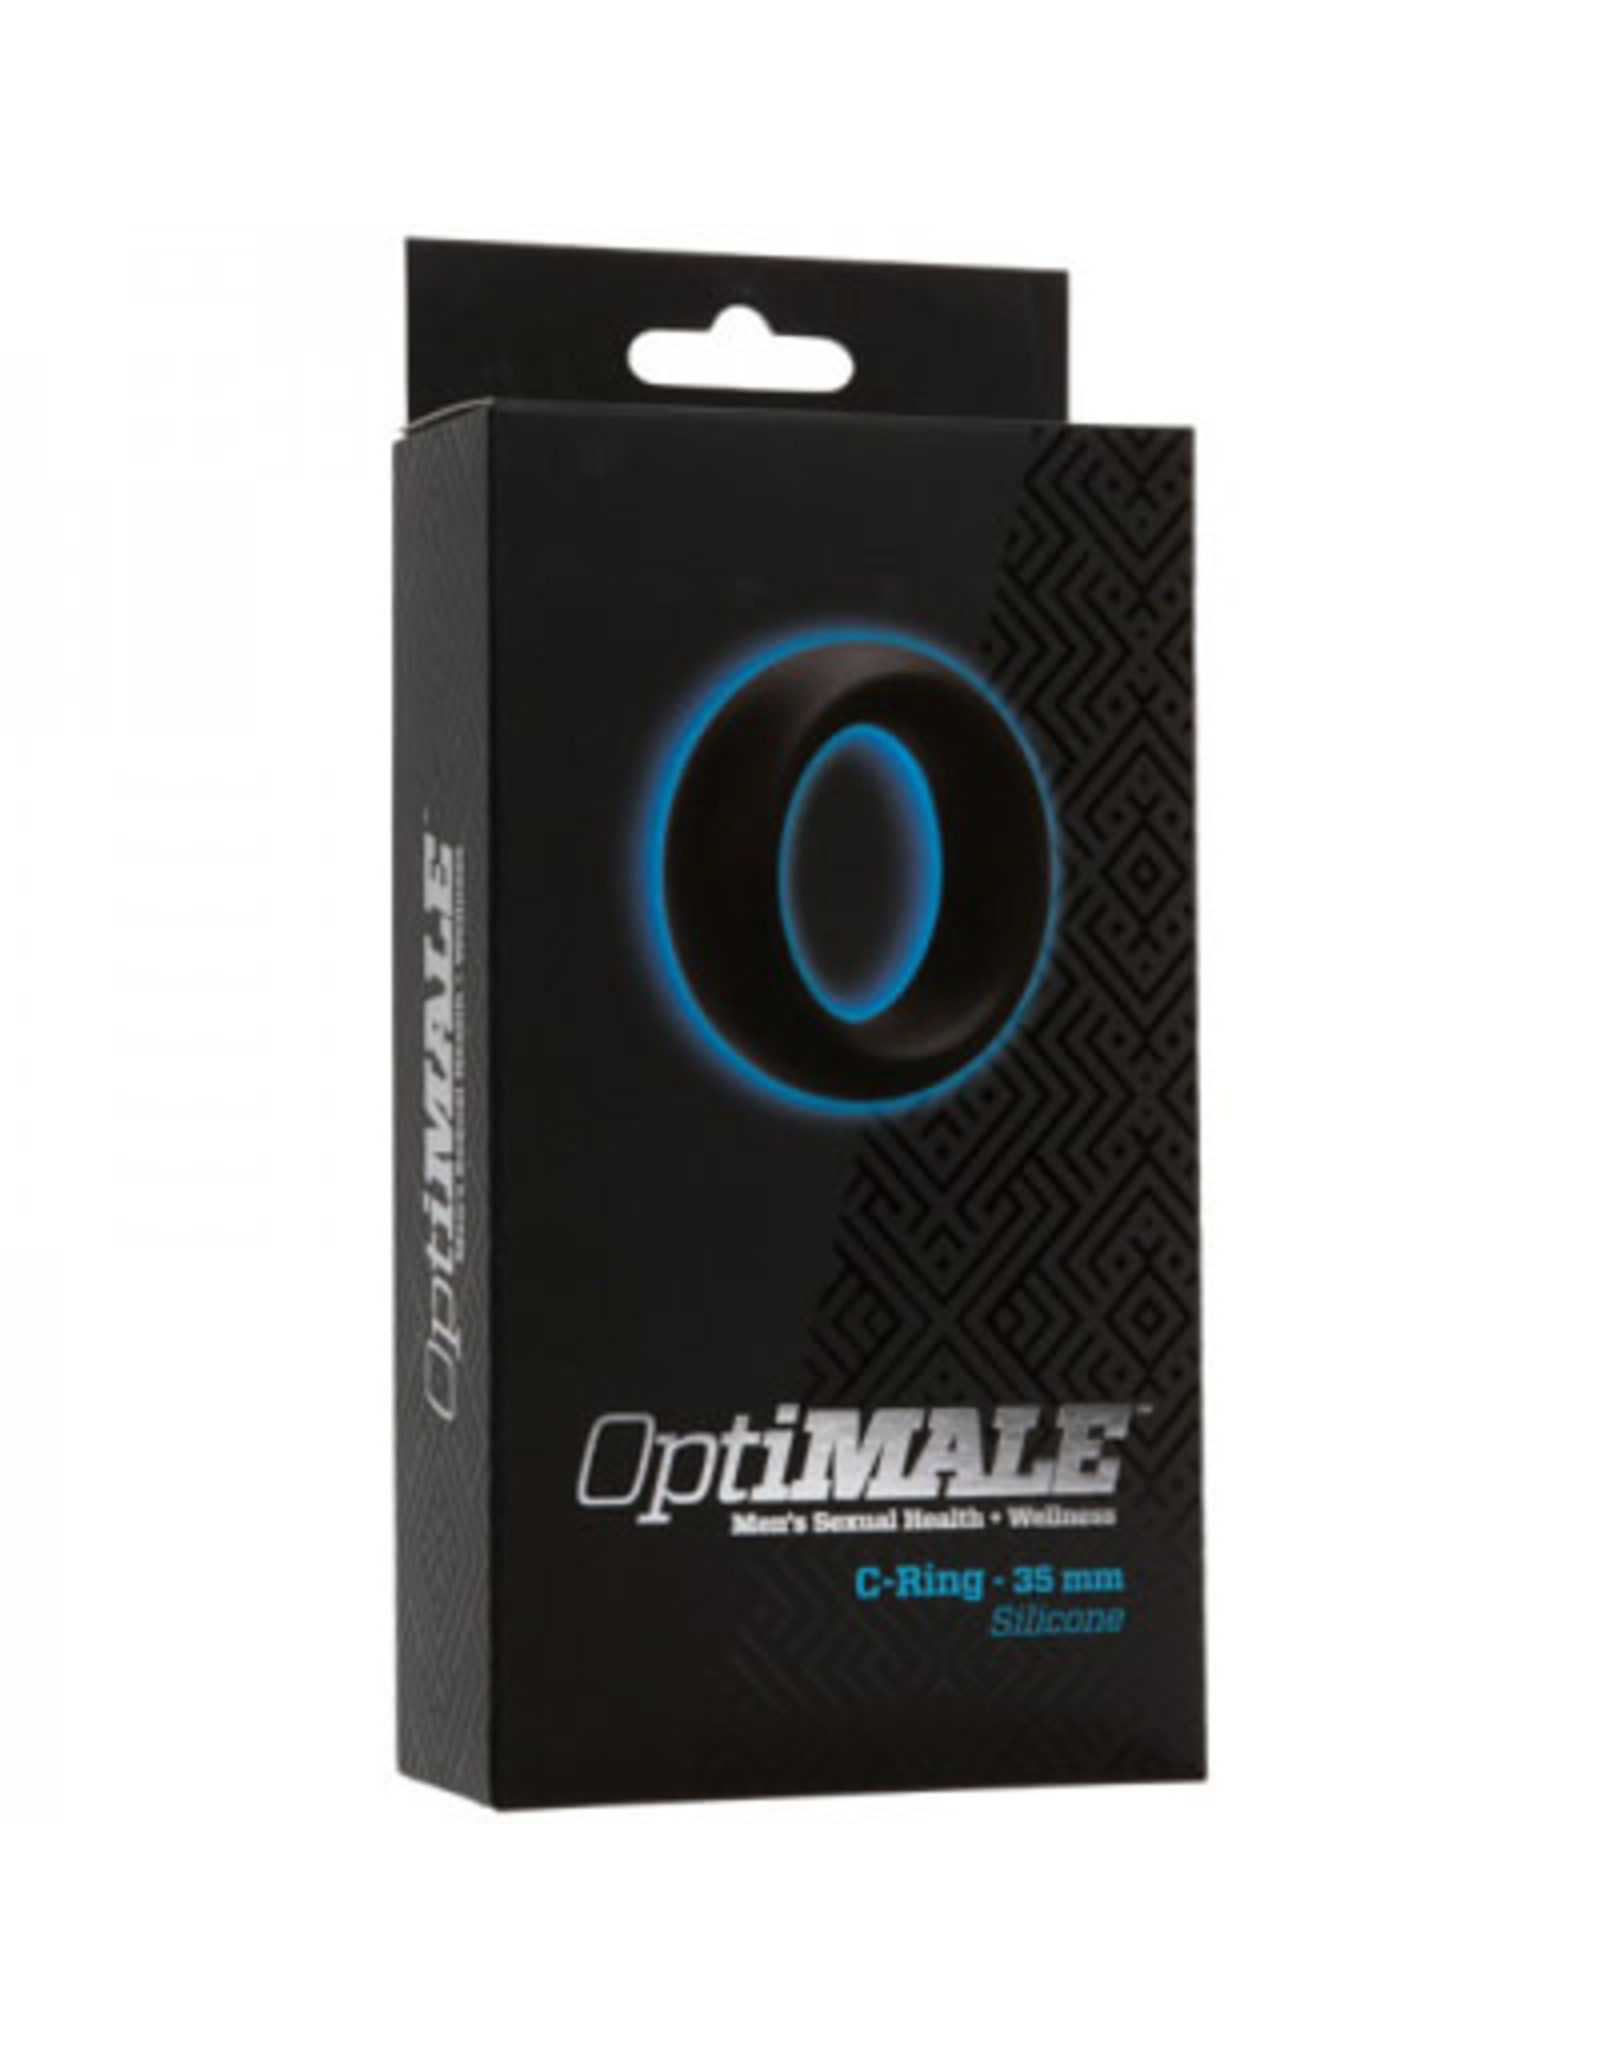 Optimale - Silicone C-Ring (35mm)